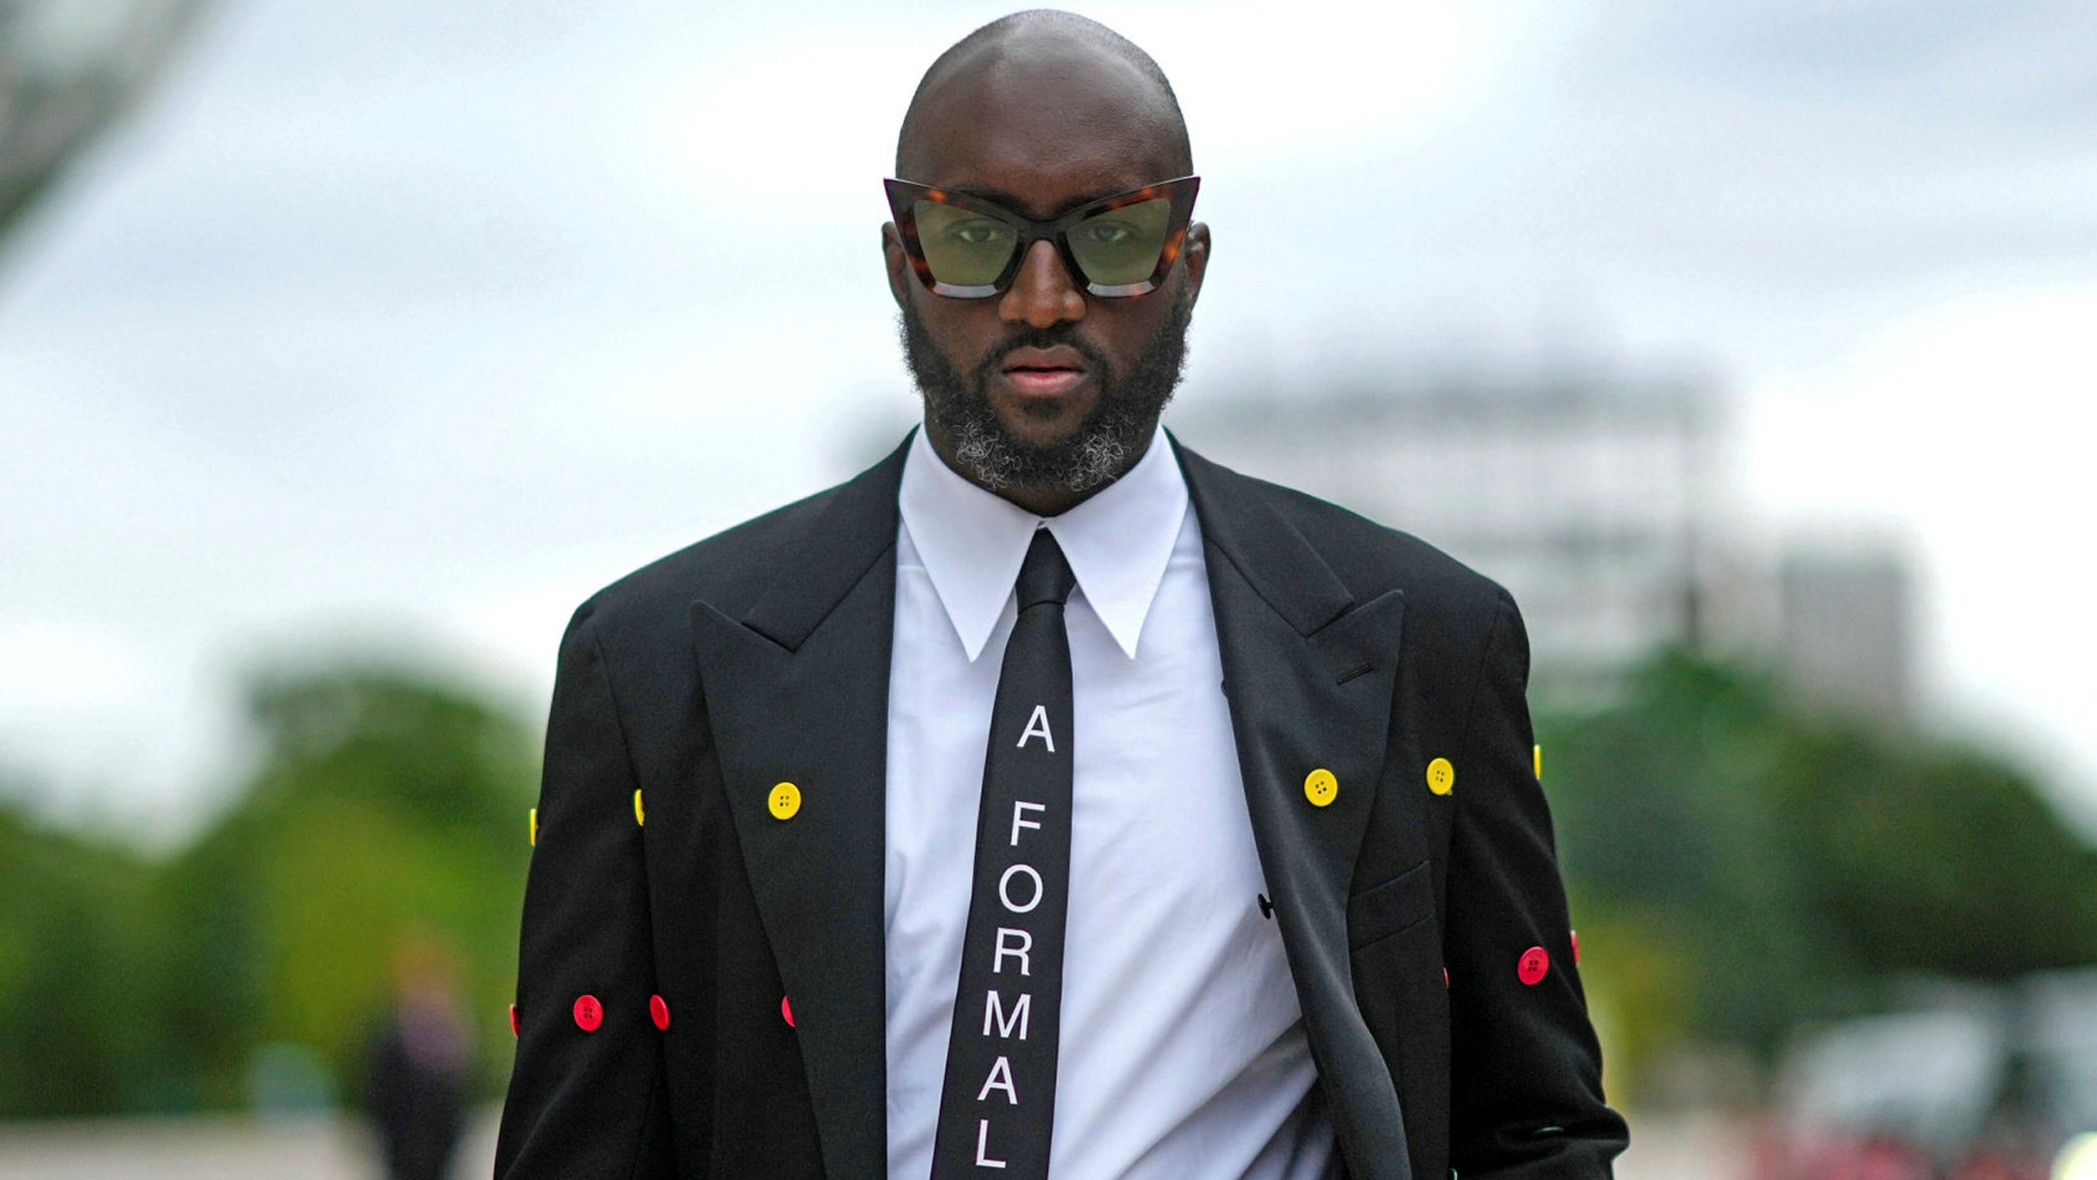 Designer Virgil Abloh Has Died After A Years-Long Battle With Cancer 29